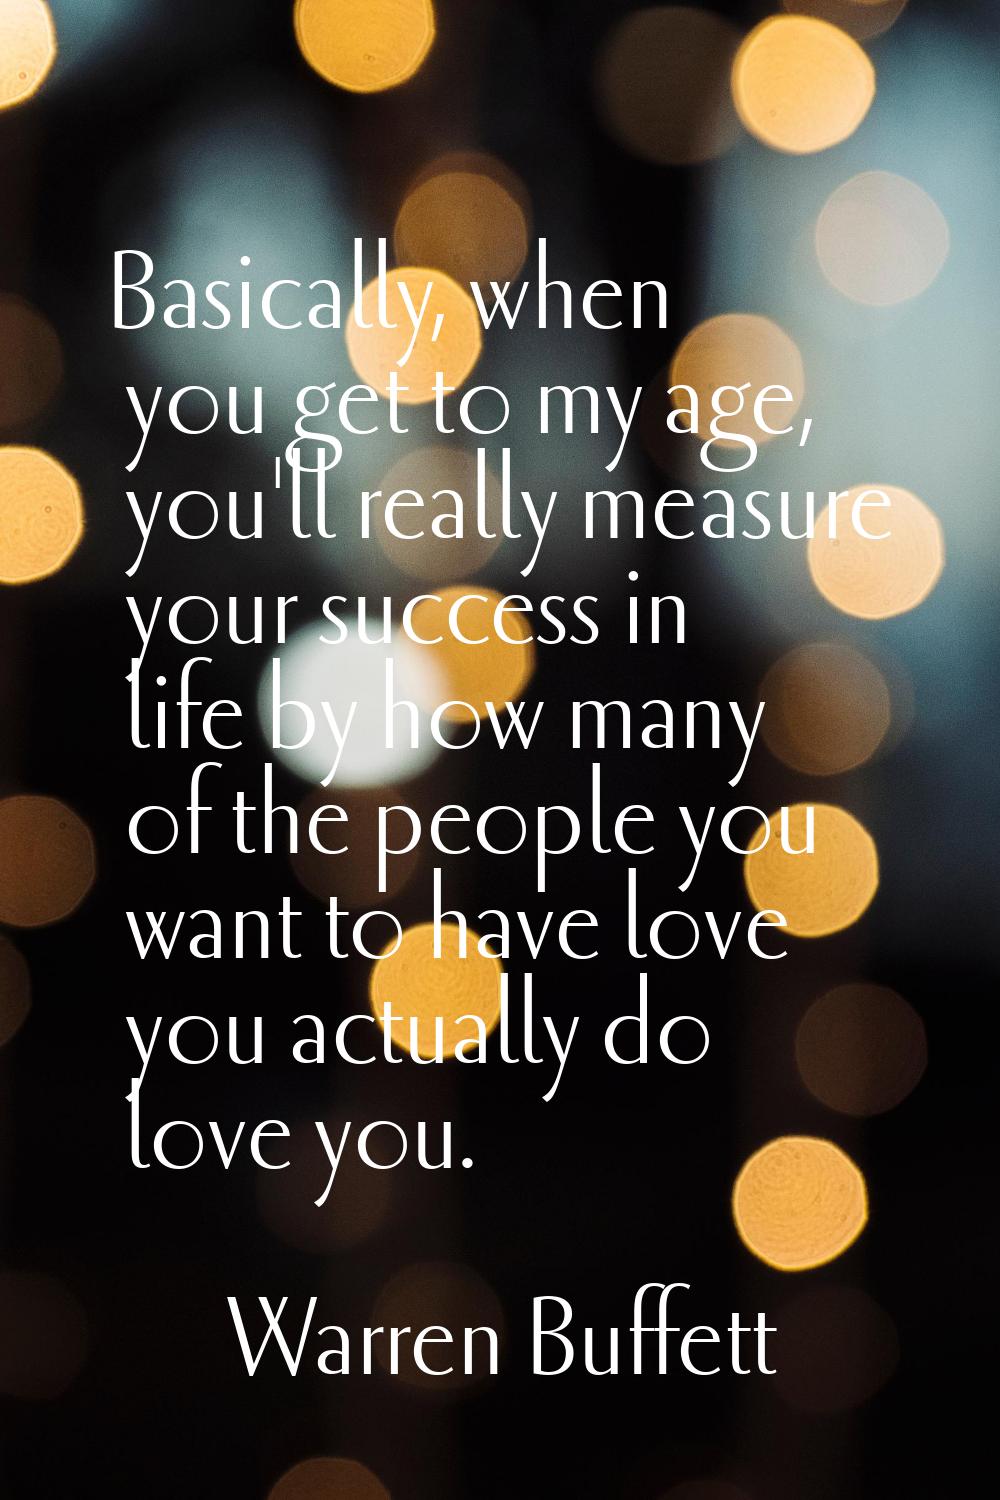 Basically, when you get to my age, you'll really measure your success in life by how many of the pe